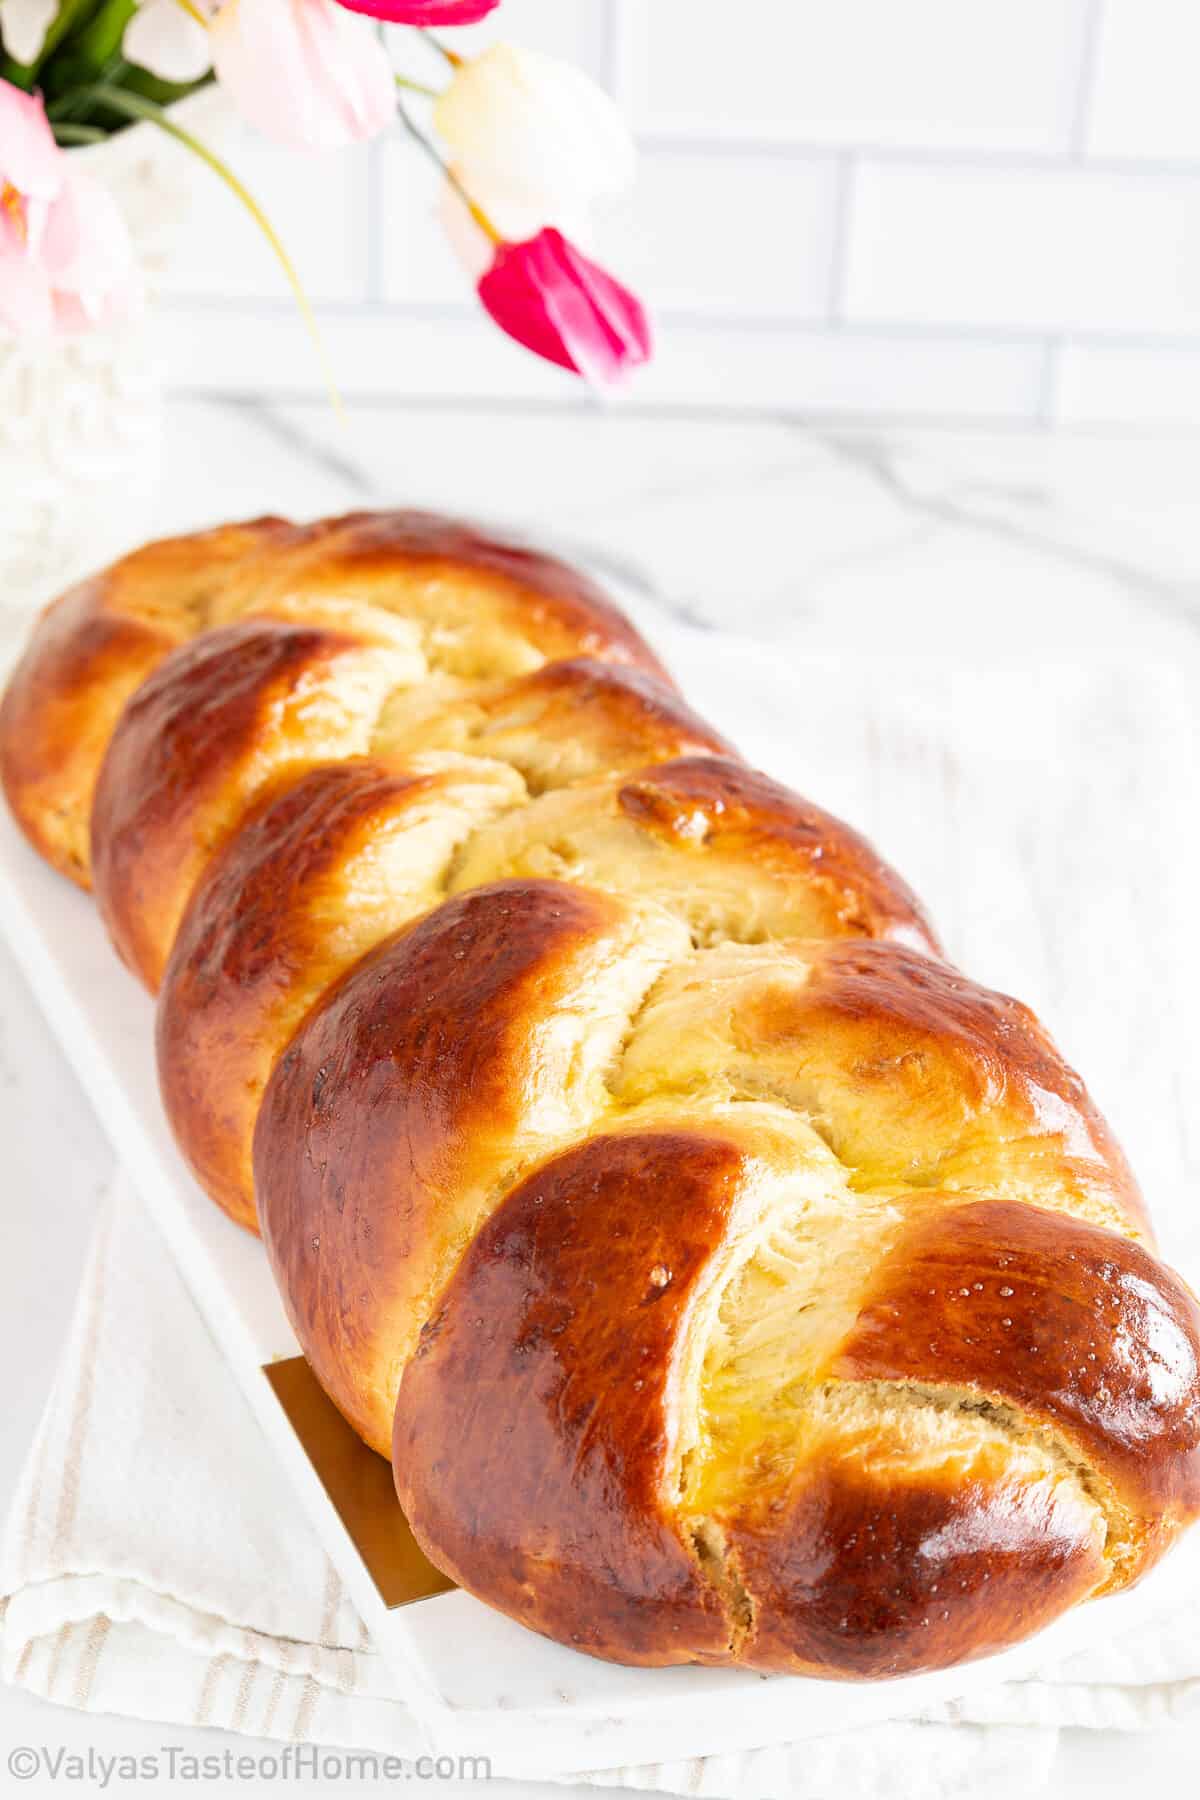 Here’s a traditional Easter Bread recipe that’s not only easy to make but tastes absolutely delicious too! This holiday bread is the classic one you’re probably craving this very moment and definitely looking to make for Easter.